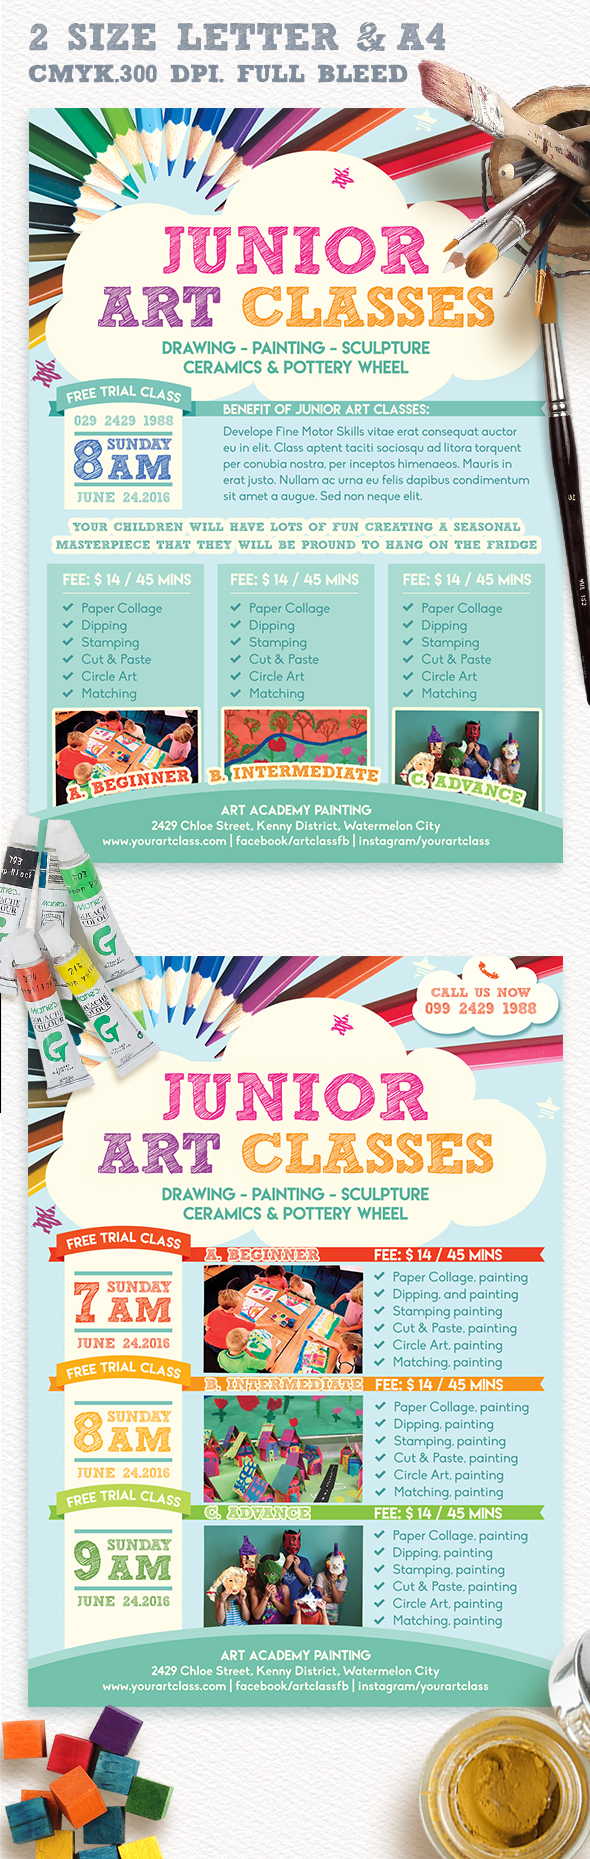 Junior Art Free Trial Class Flyer Template by Emty-Graphic on DeviantArt